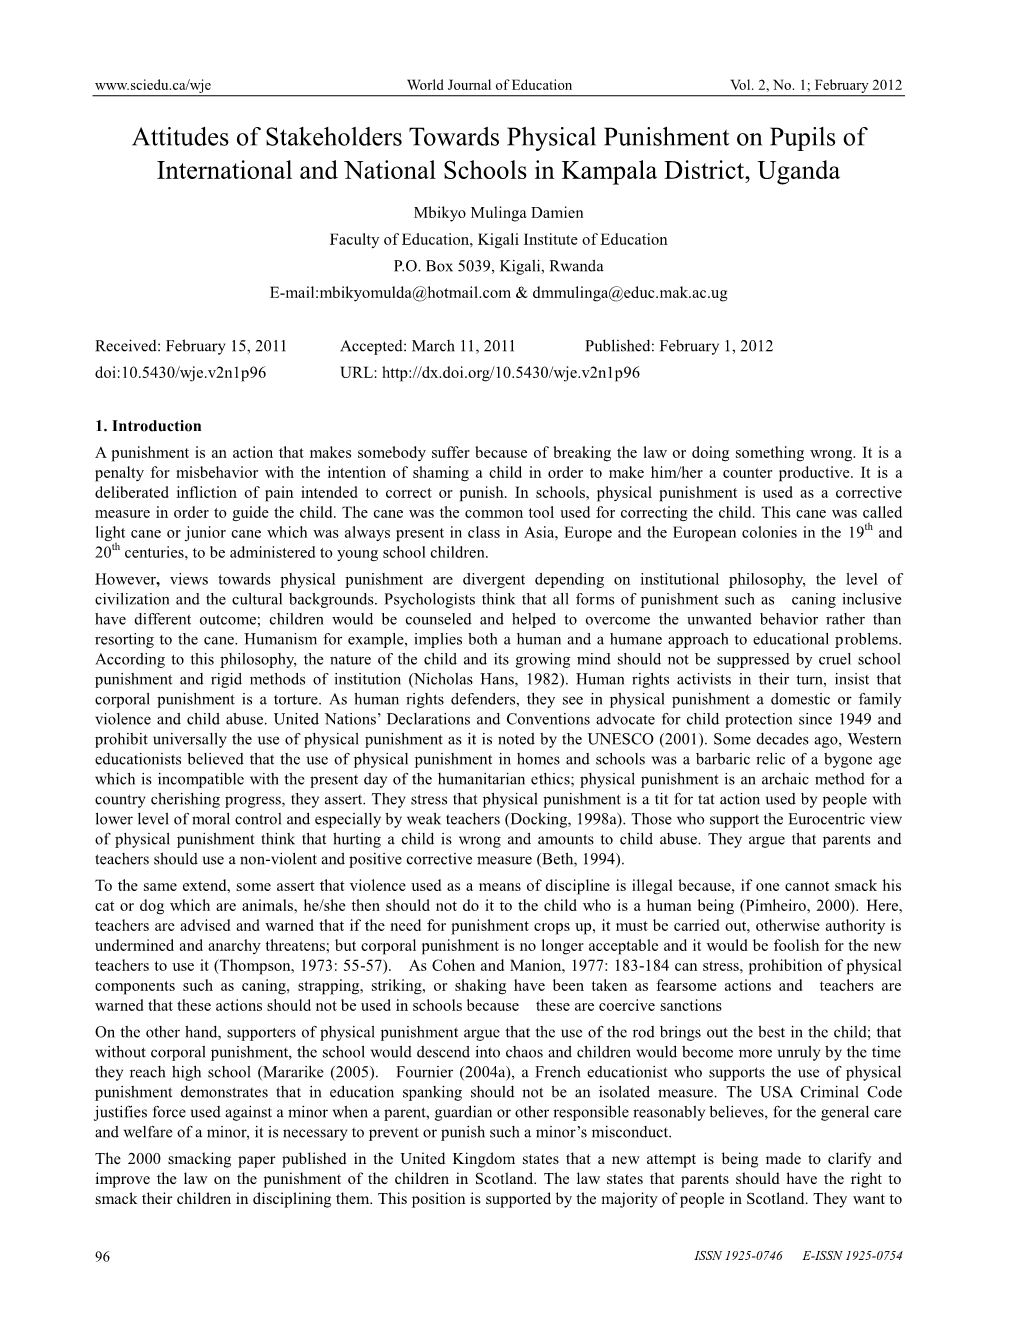 Attitudes of Stakeholders Towards Physical Punishment on Pupils of International and National Schools in Kampala District, Uganda